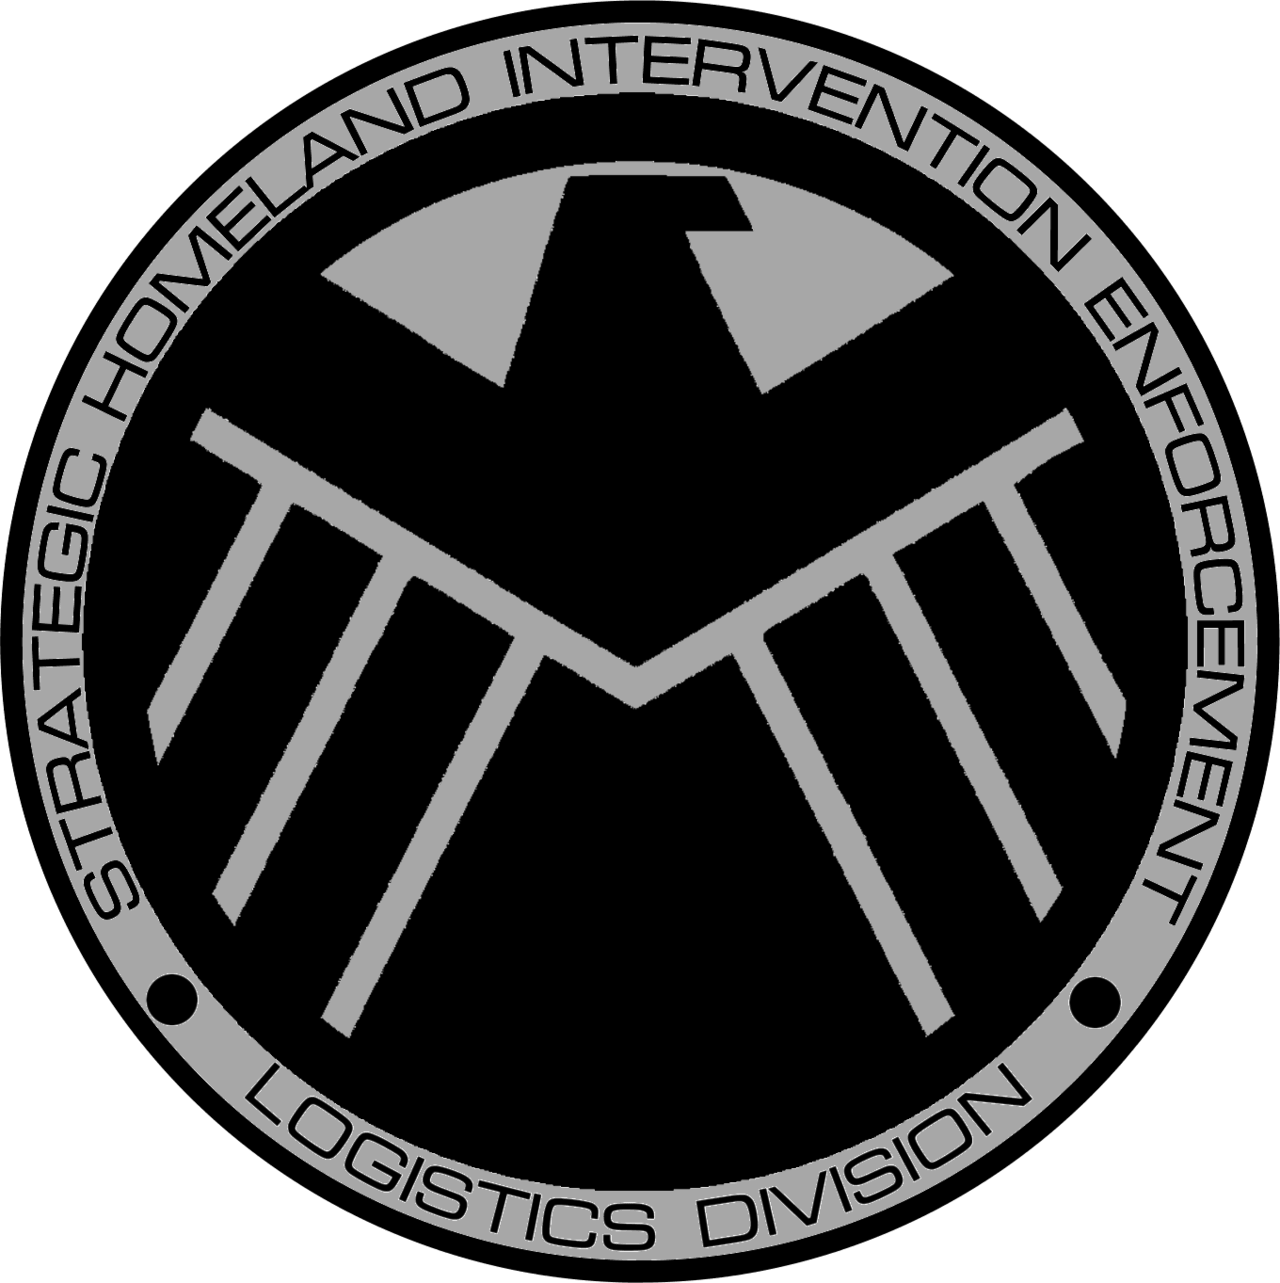 Marvel Shield Logo - Marvel's Agents of SHIELD Air Forces Insignia by viperaviator ...